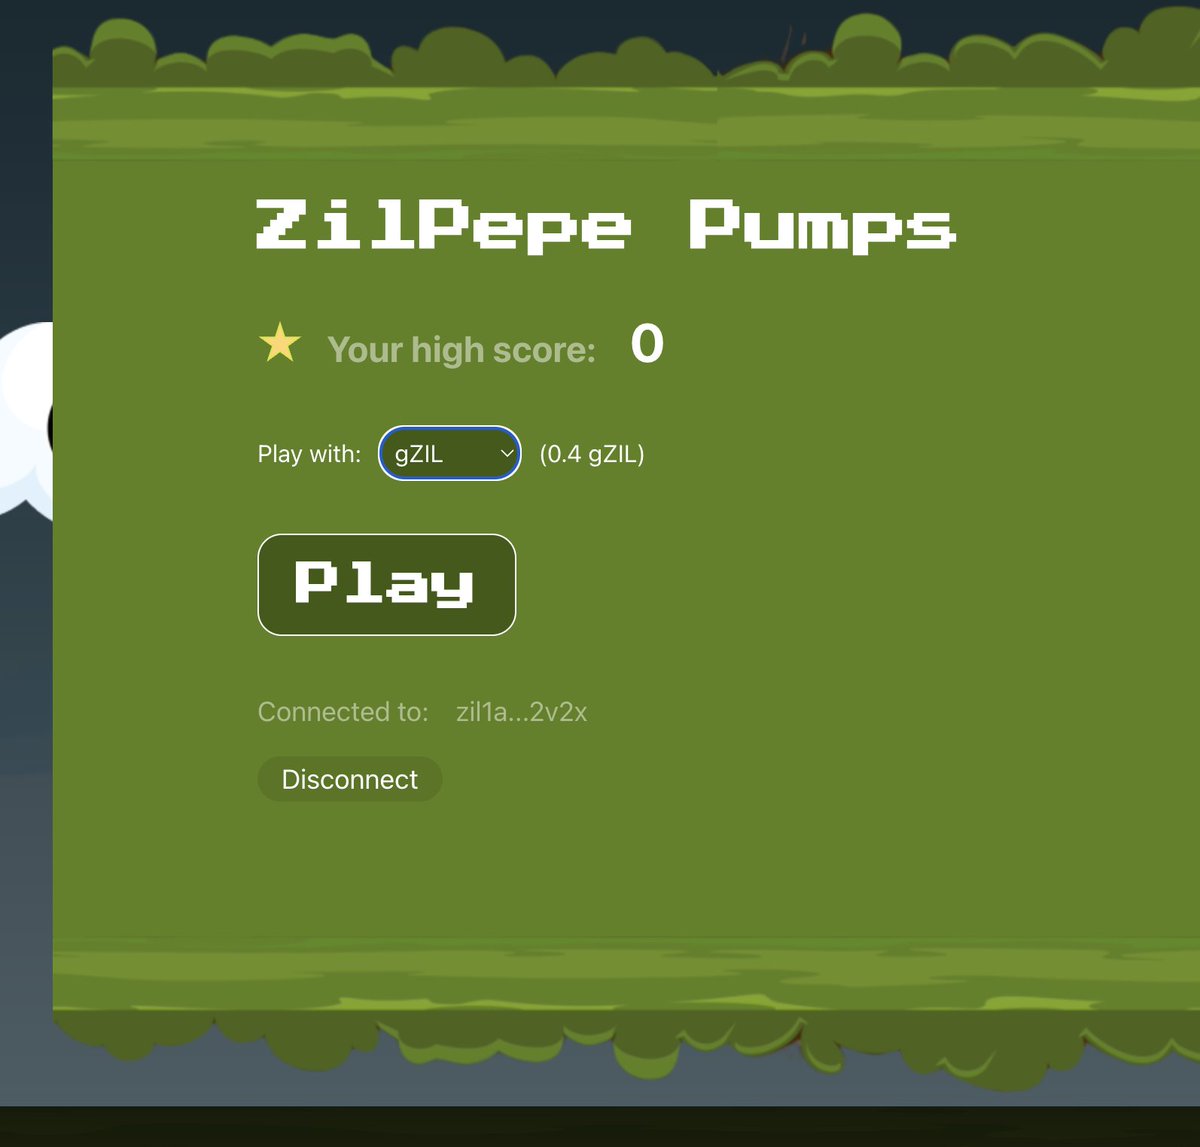 now you can play #ZilPepePumps with $gZIL.

Game: play.zilpepe.com

Ready for some fun #zilfam @zilliqa #zilpepe